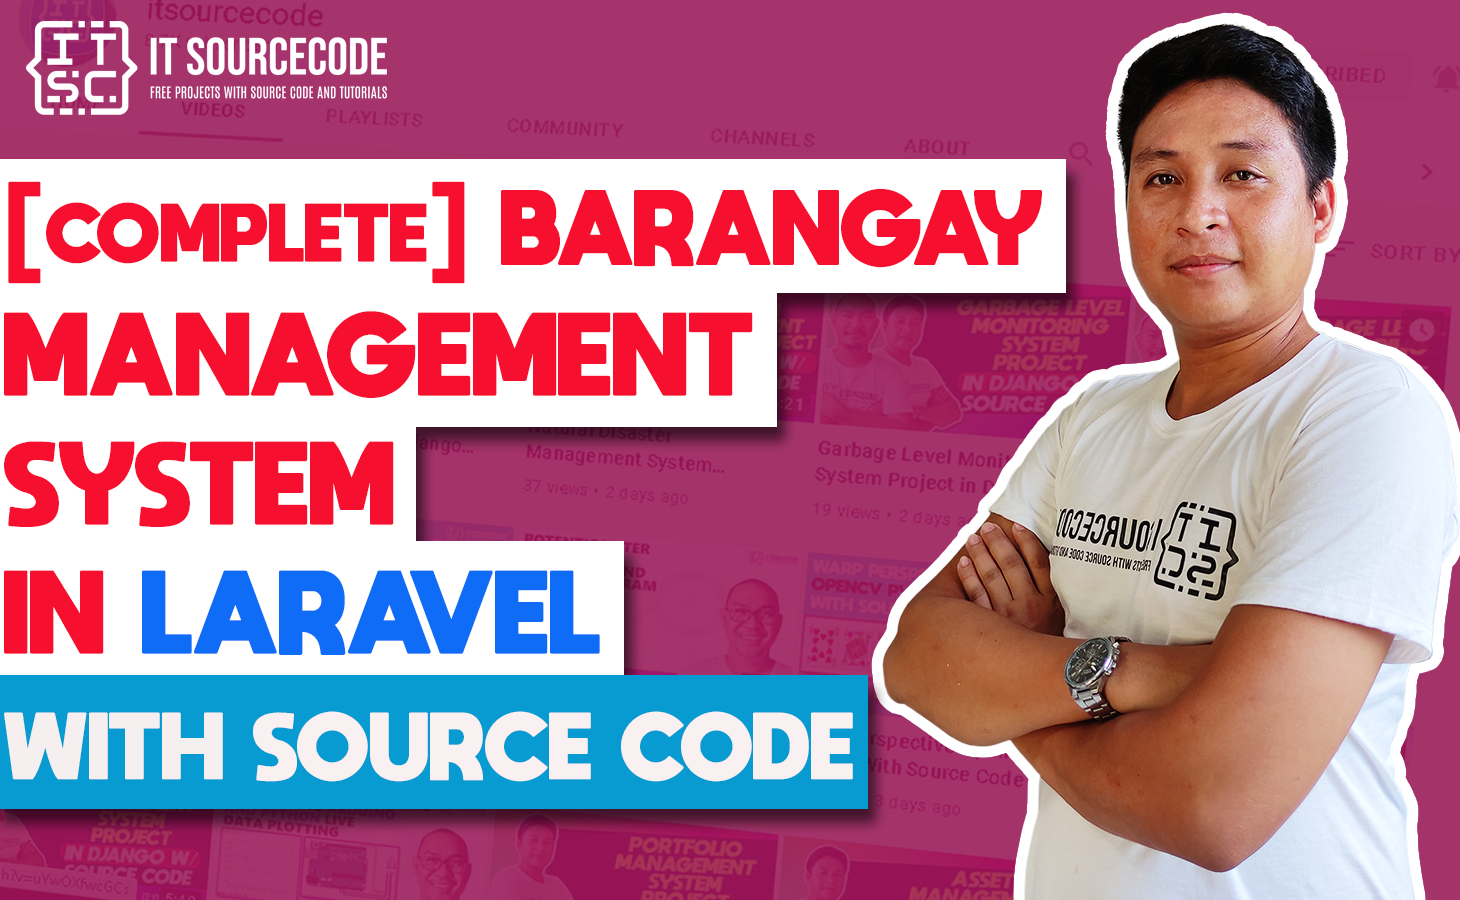 Barangay Management System in Laravel with Source Code